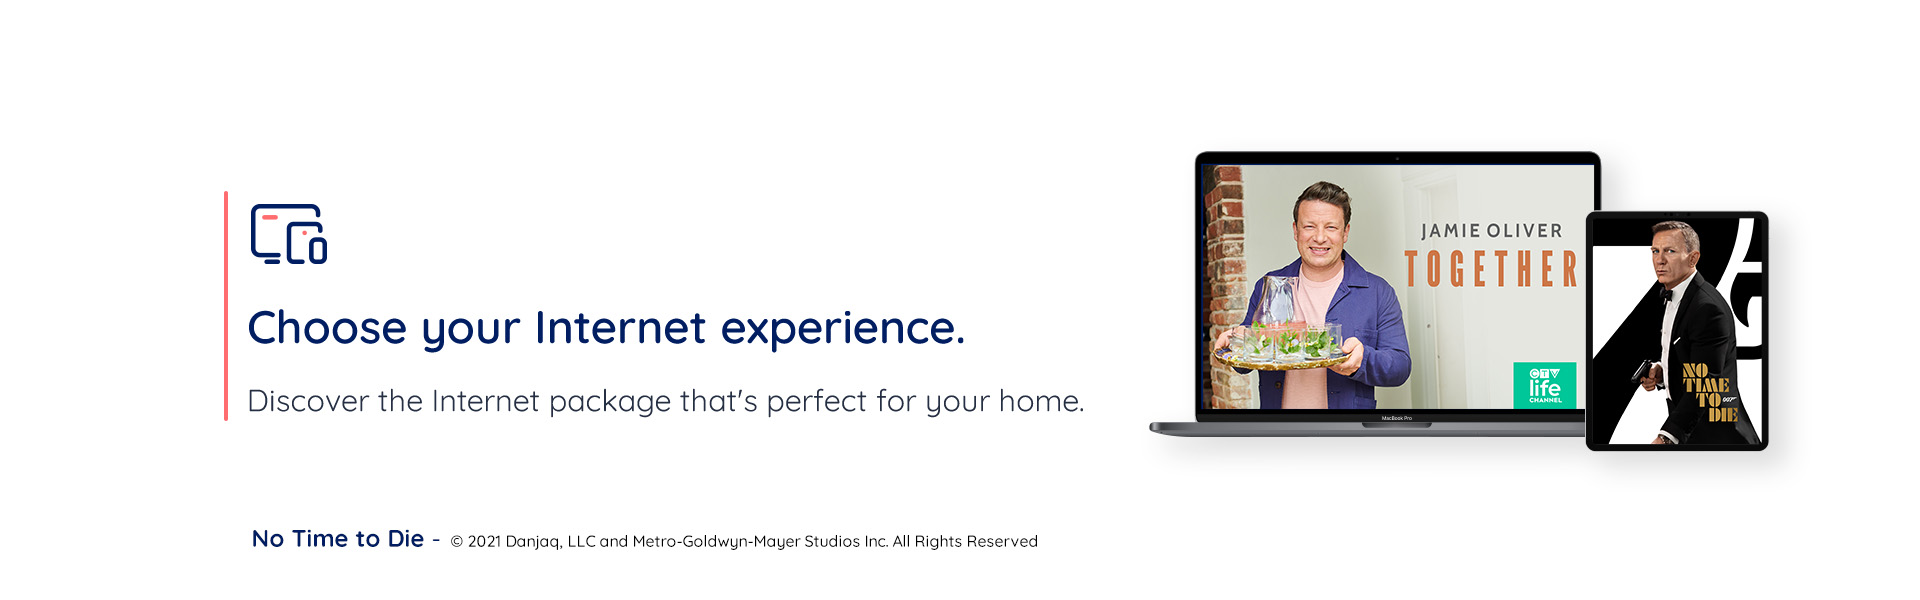 Choose your Internet experience. Discover the Internet package that's perfect for your home.